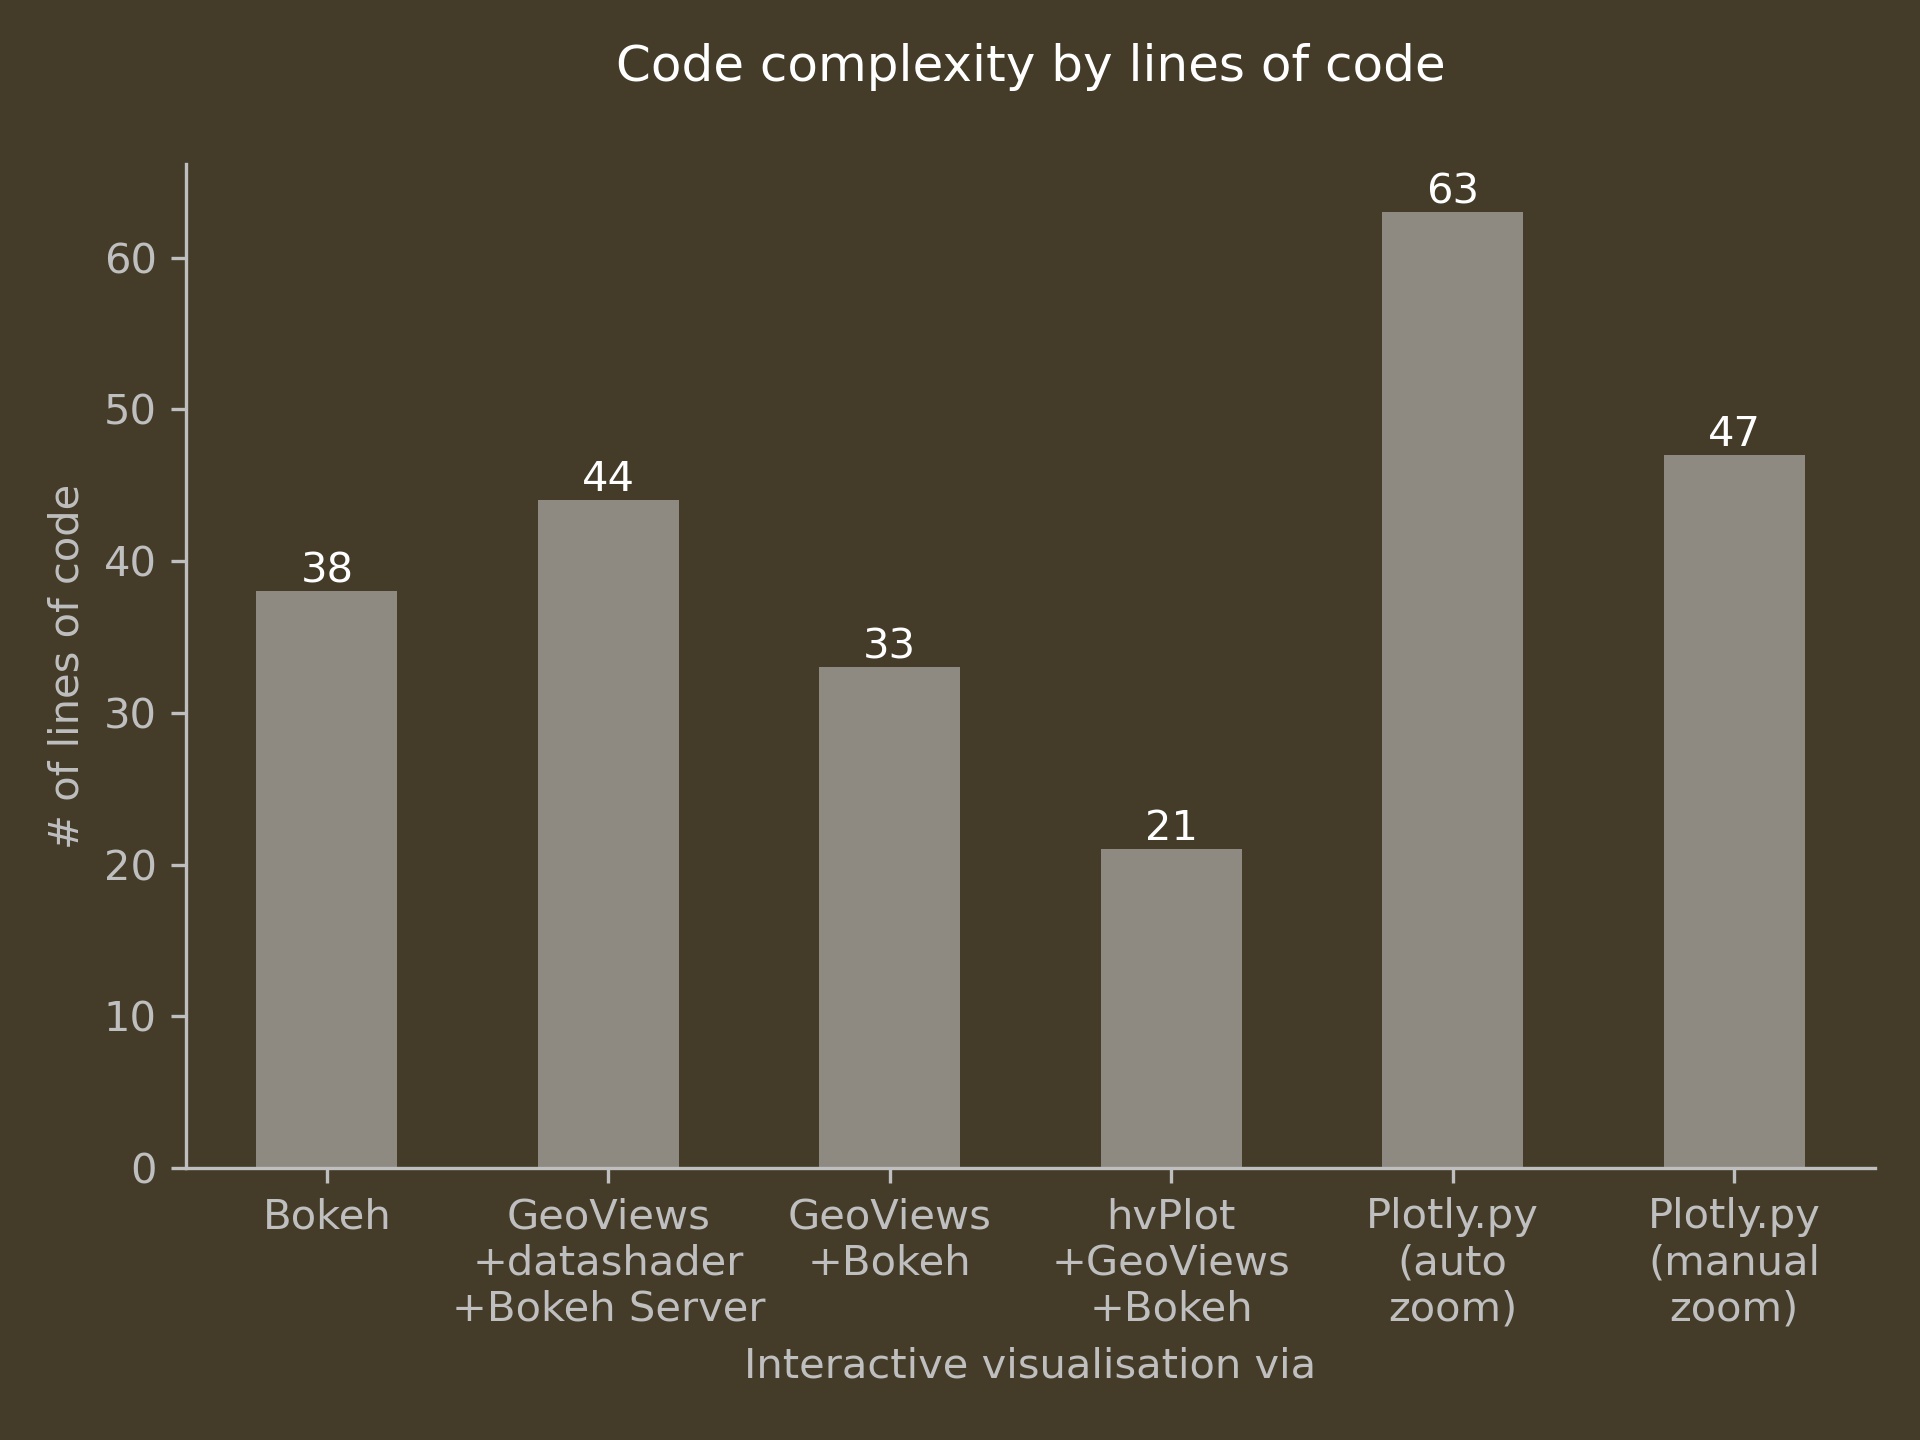 Lines of code comparison for interactive visualisations in Python